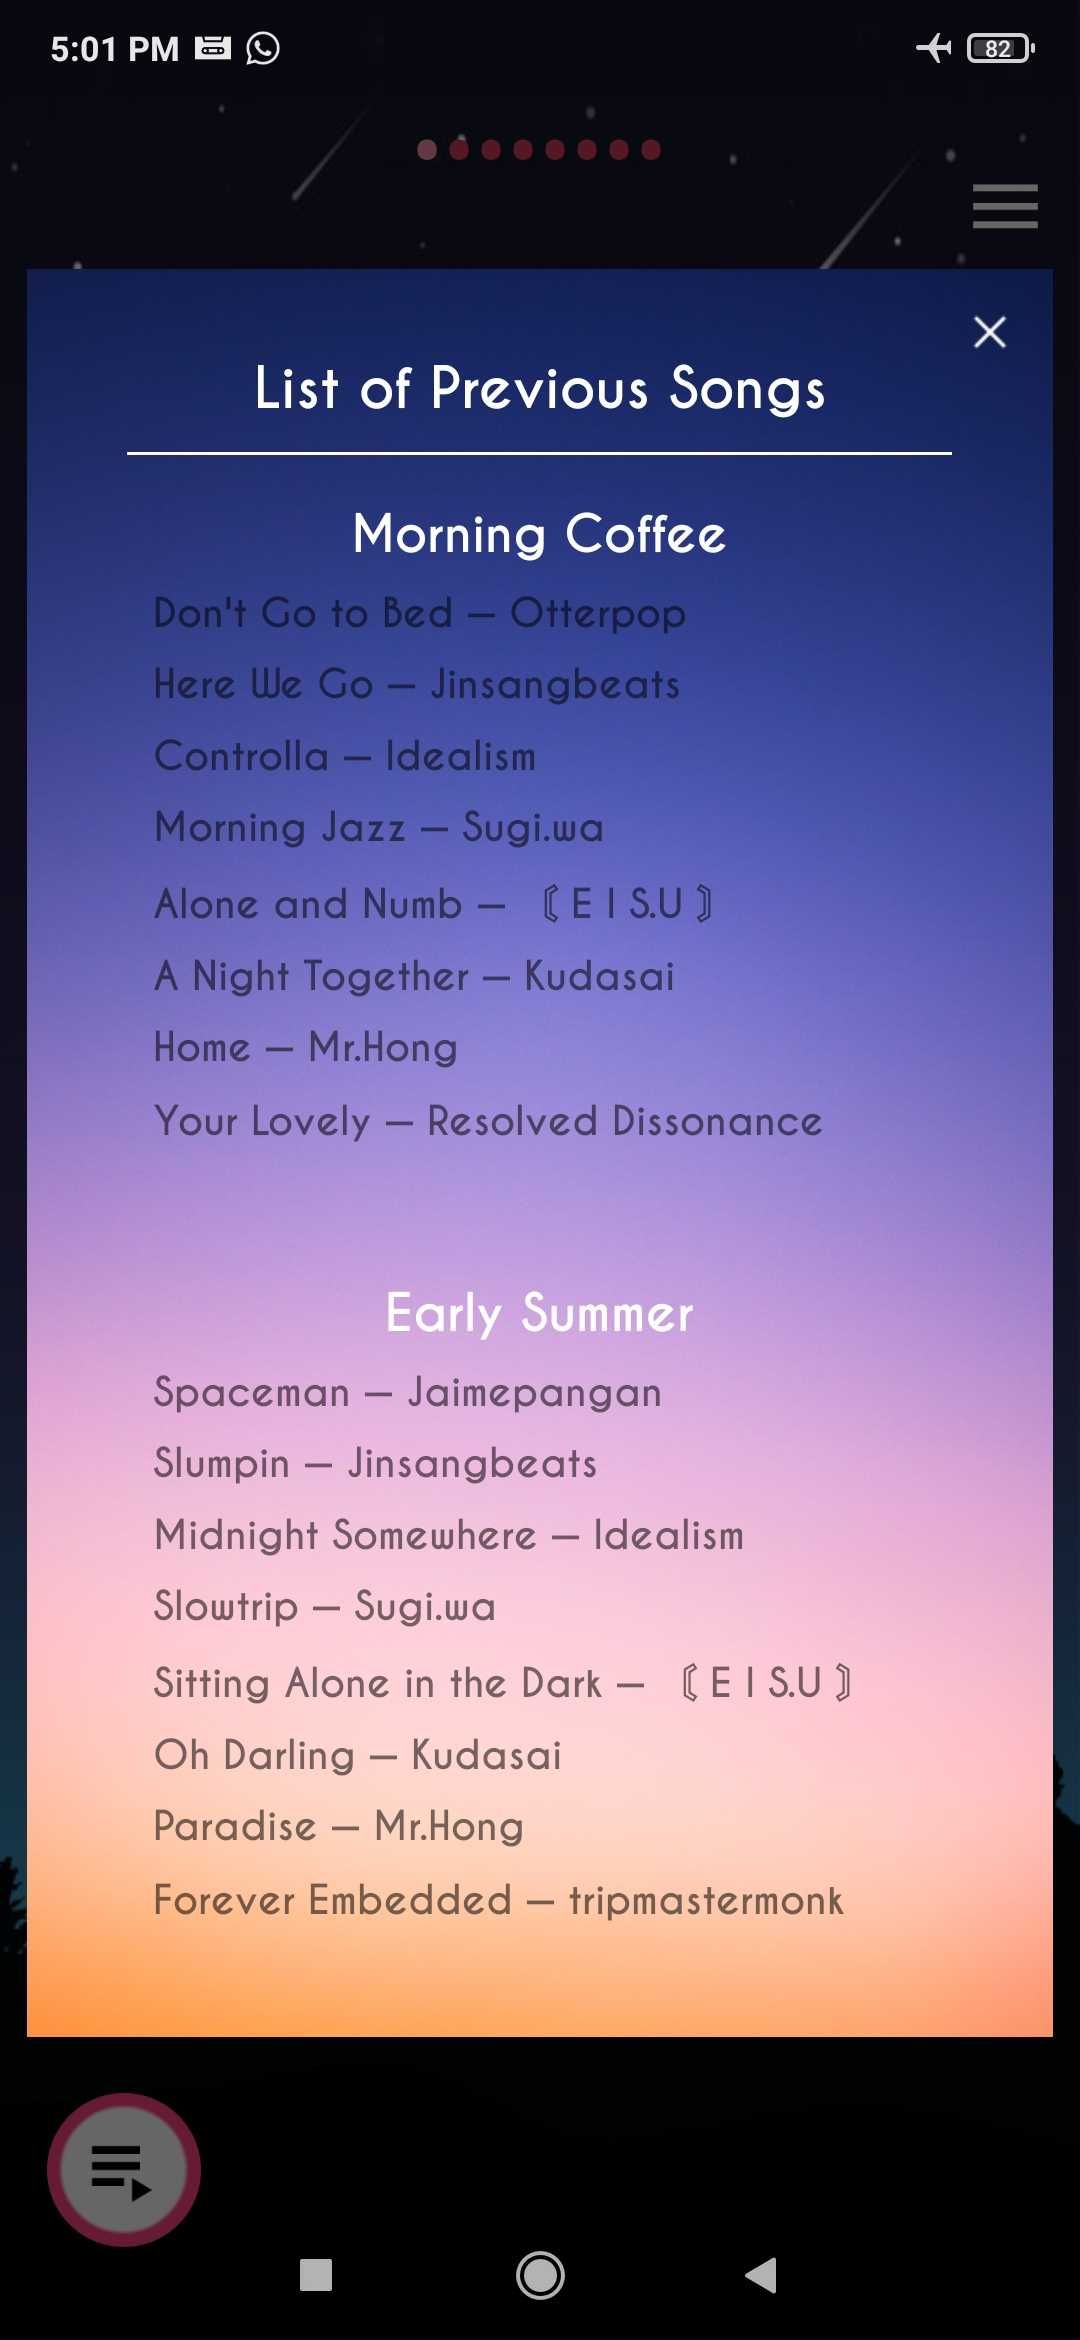 You can quickly check which songs played previously in Loffee